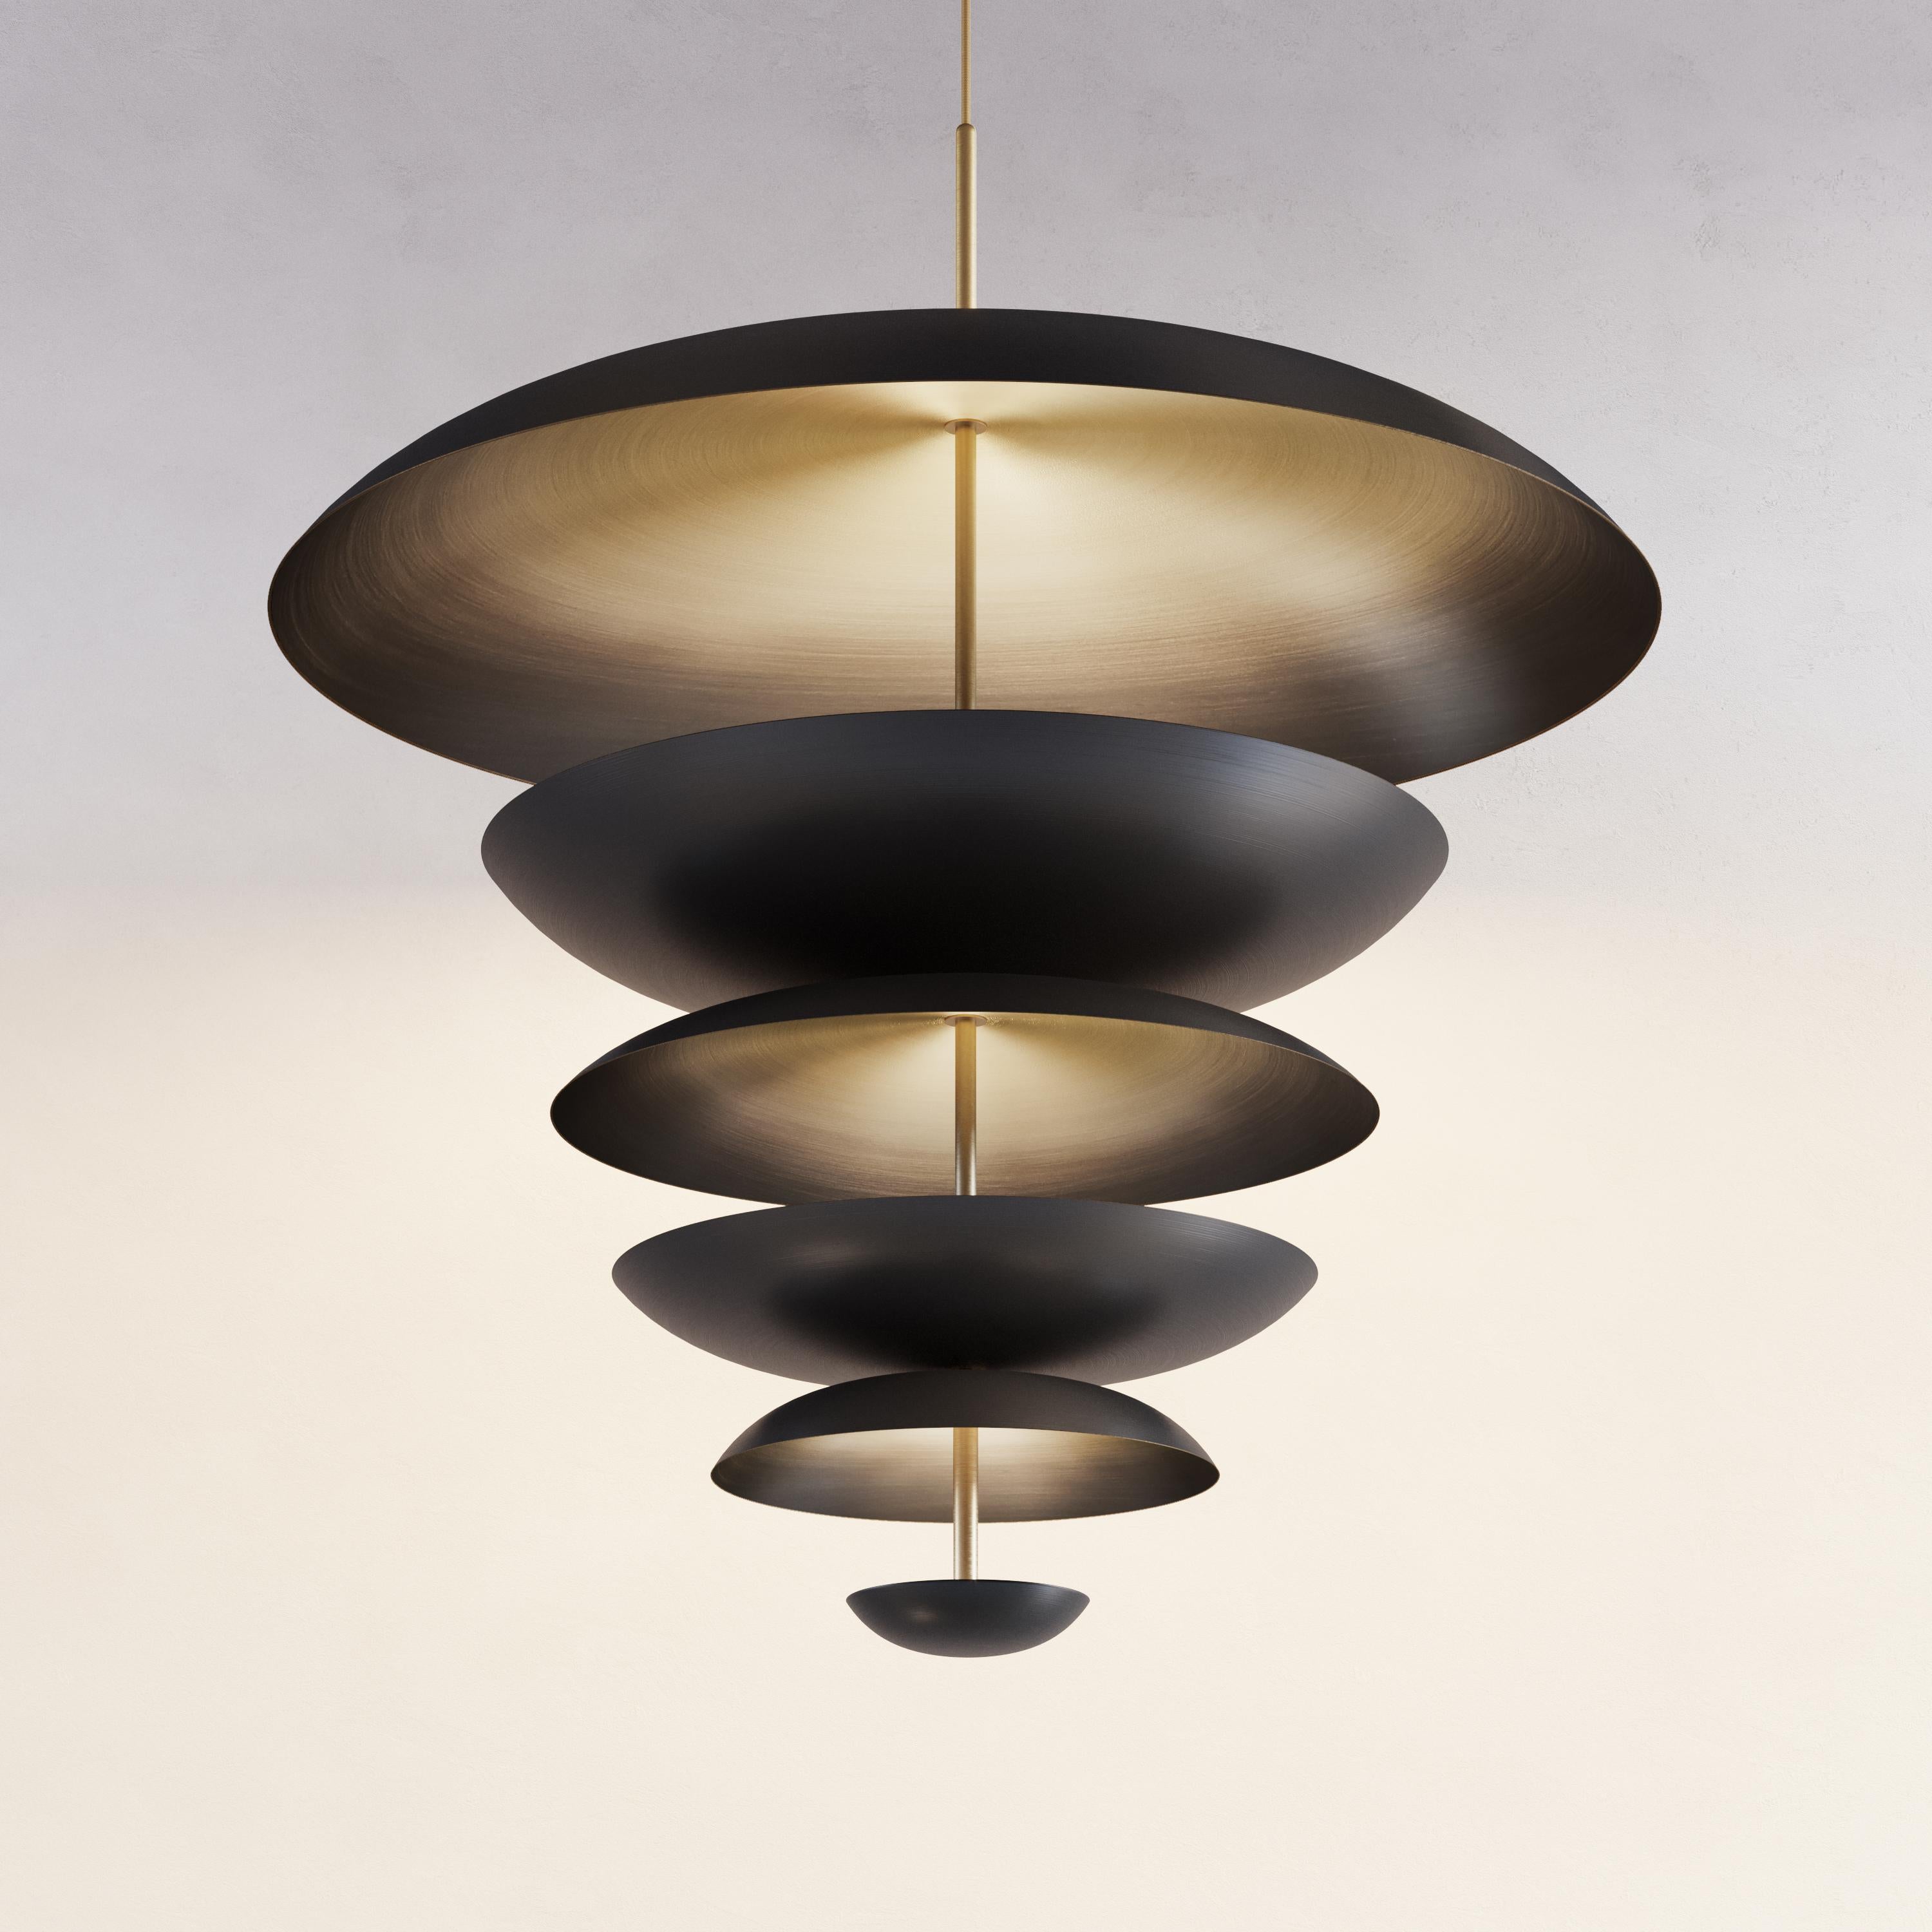 Finely hand-spun brass plates make up this pendant light. One side of the shade is finished in a dark bronze patina and the other in a gently brushed brass gradient. The light is projected into the shade and reflects out, illuminating space without